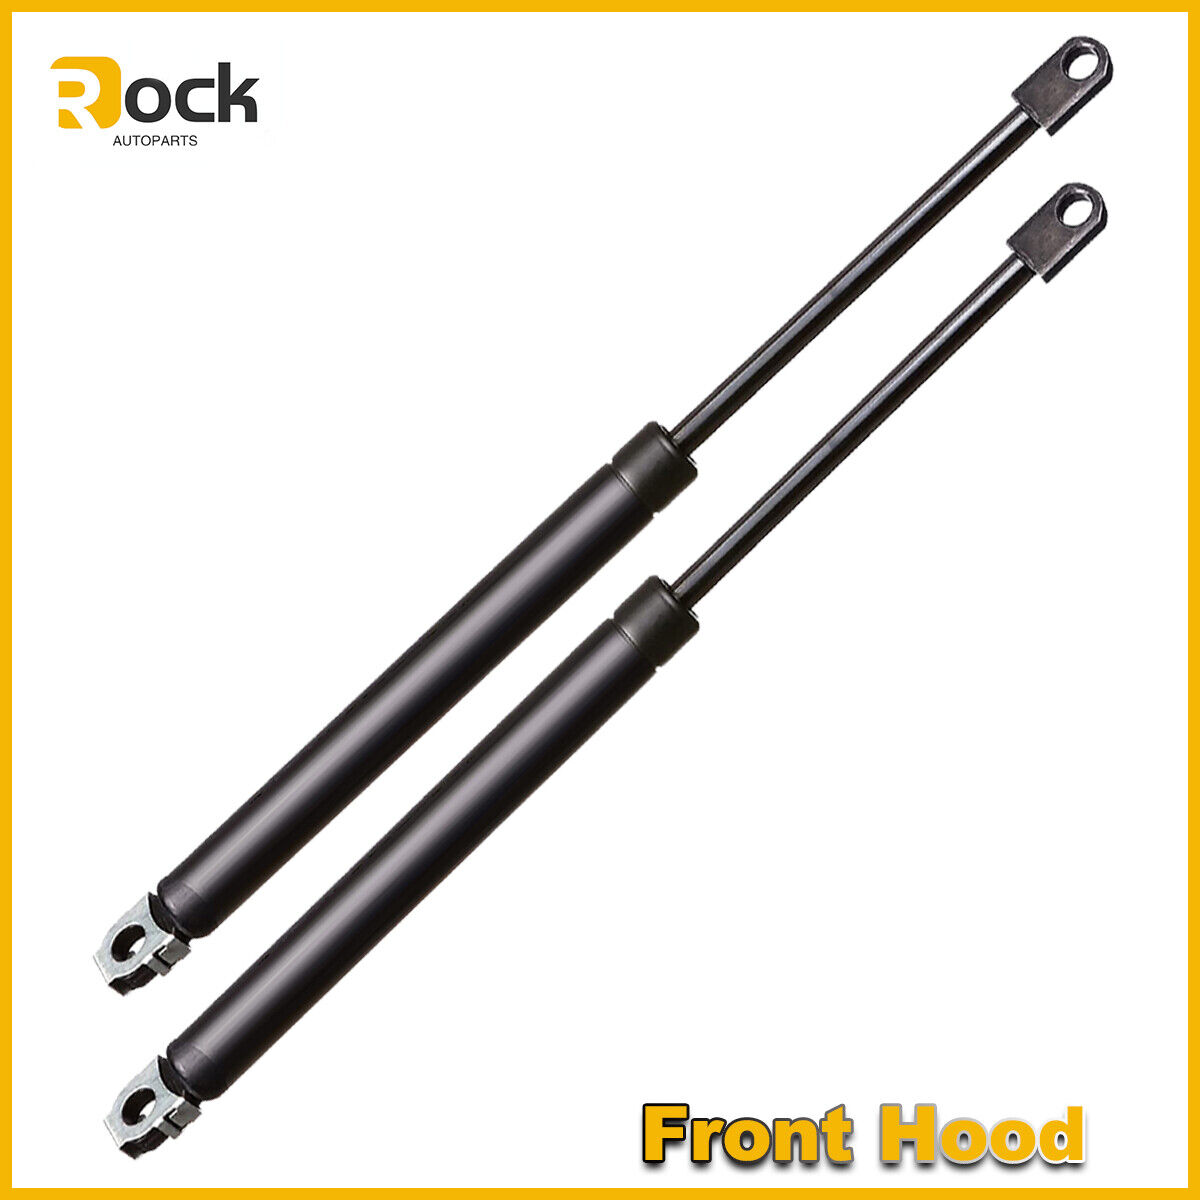 2 Front Hood Lift Support for Buick Riviera Cadillac Seville Oldsmobile Toronado